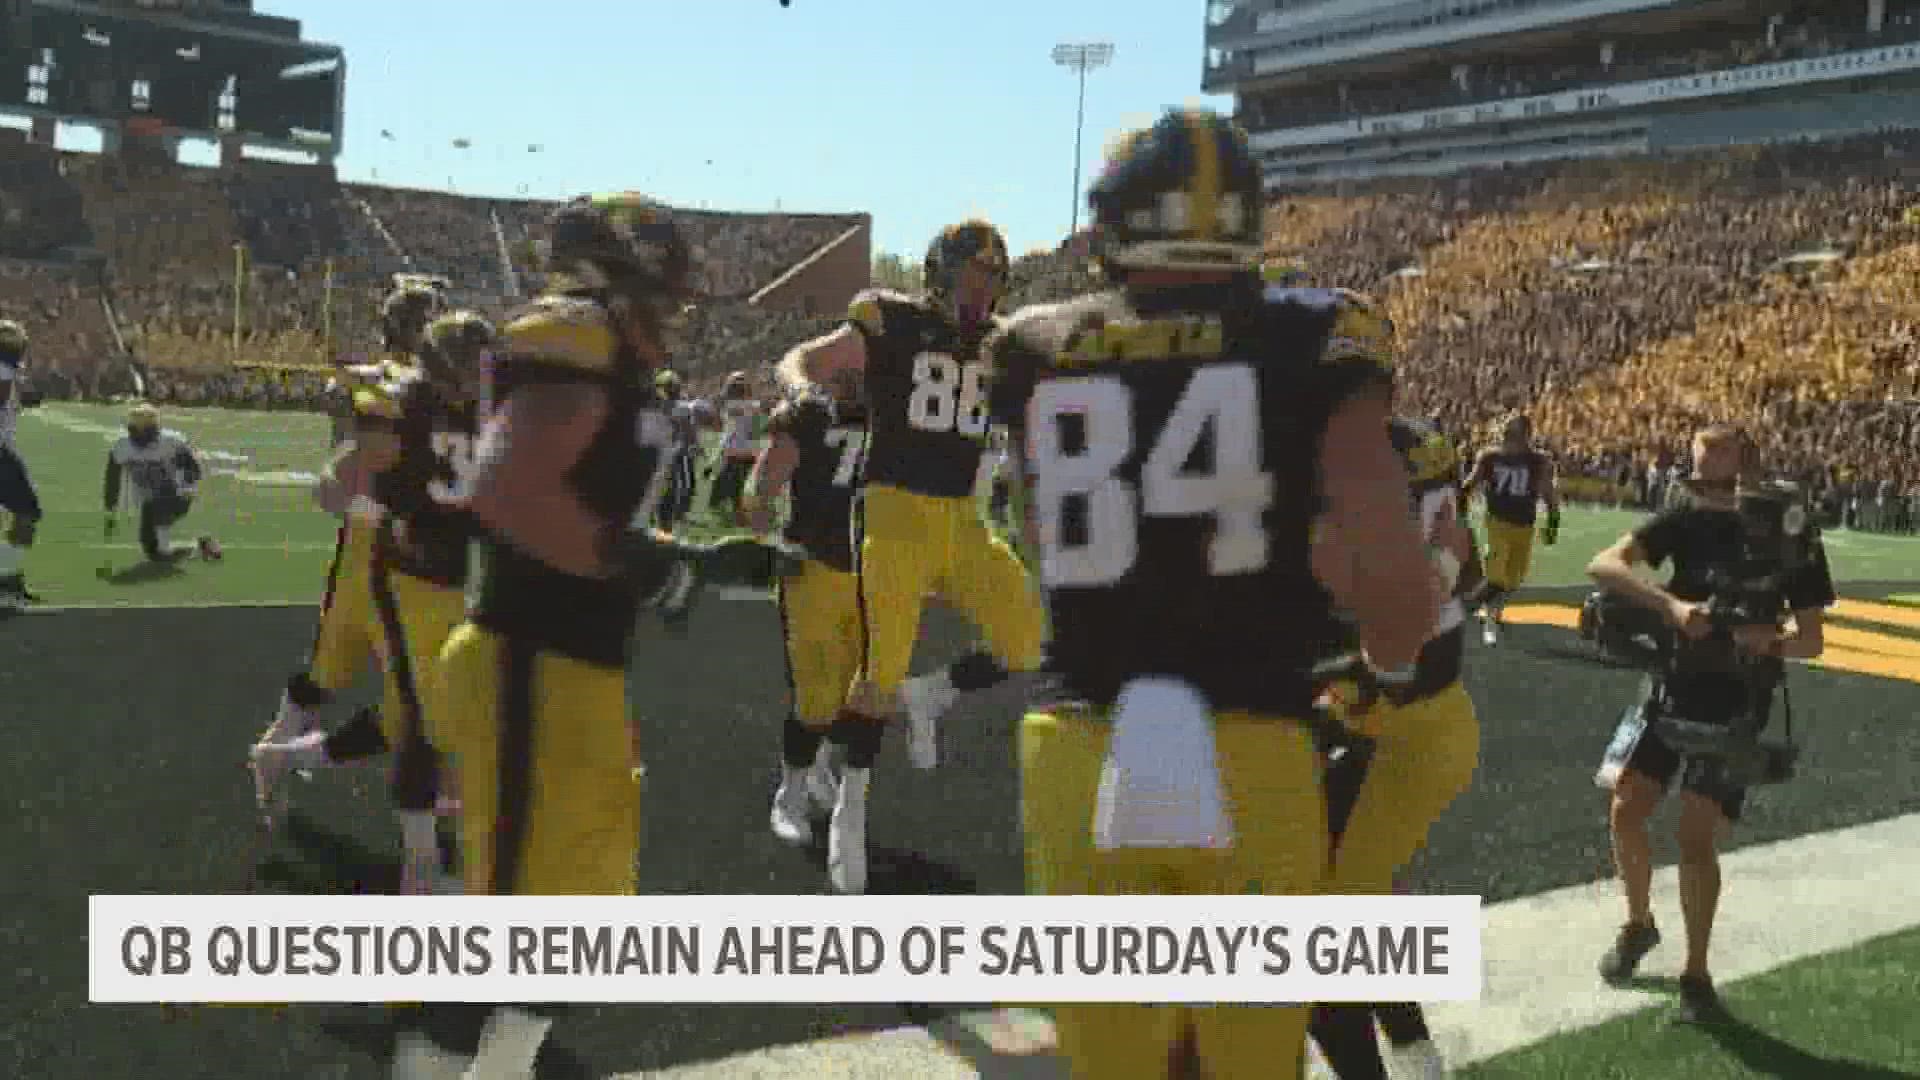 It's been almost a month since Iowa has scored an offensive touchdown.